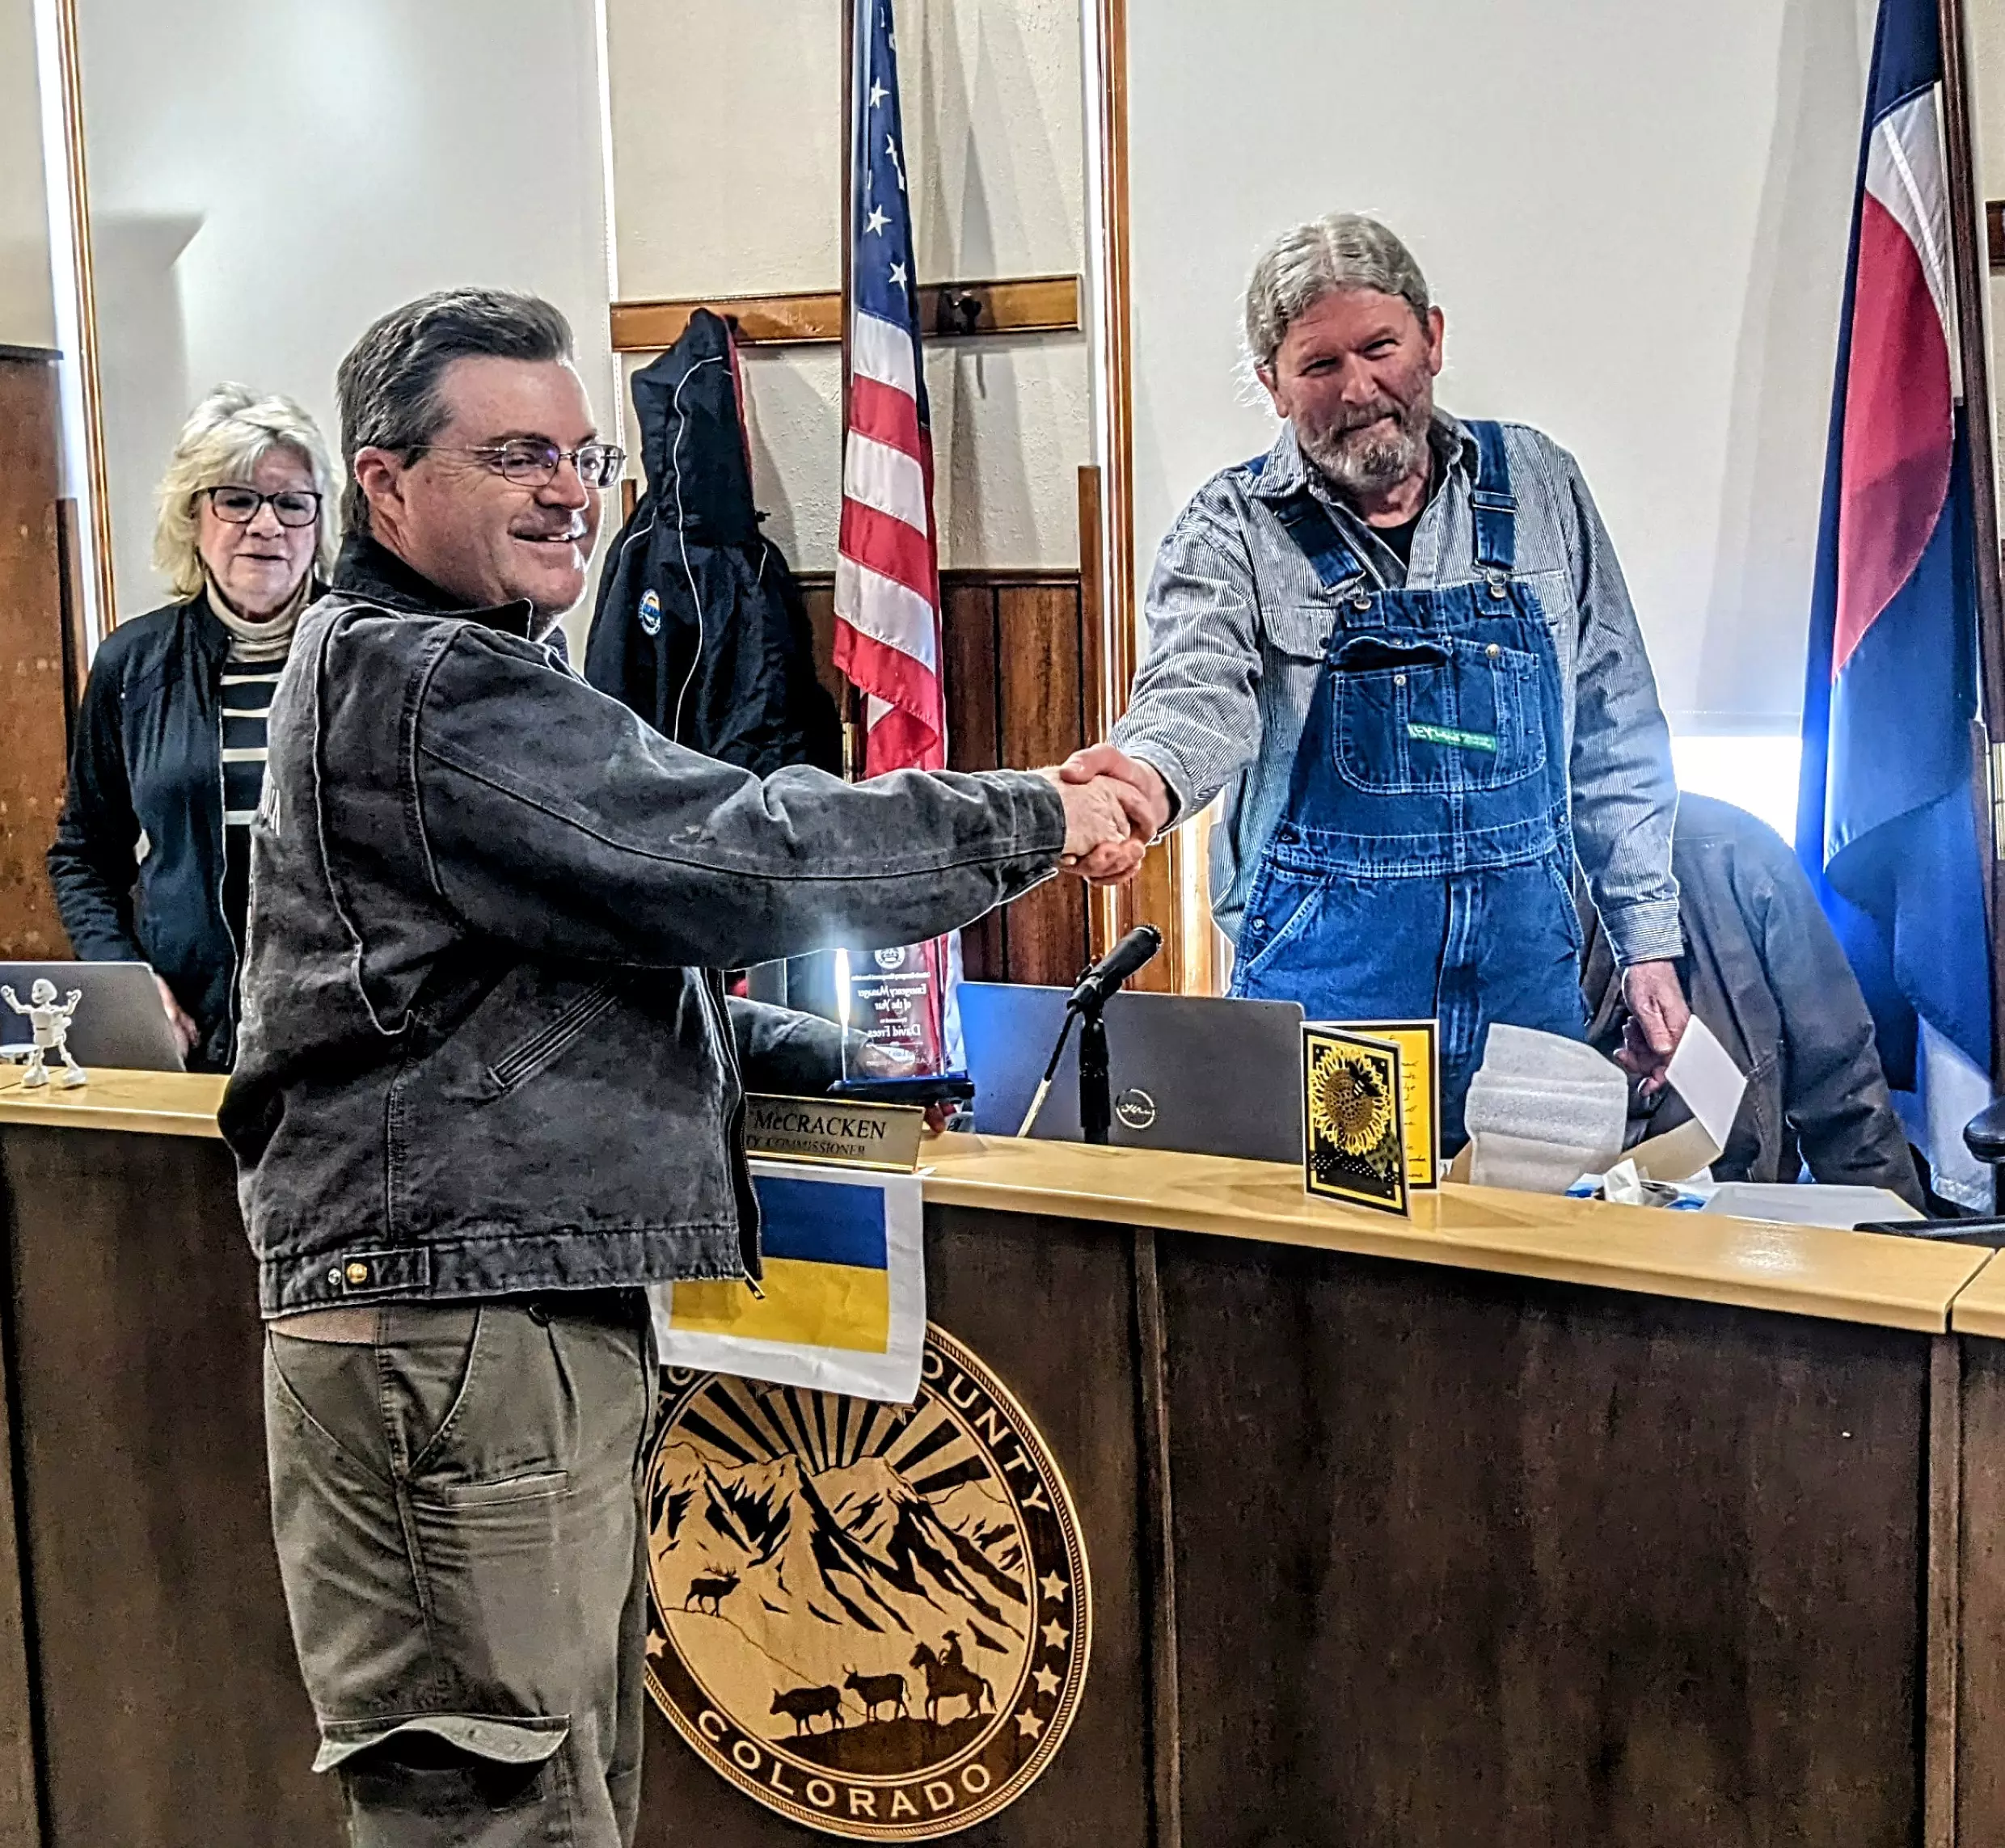 Photo of David Frees (left) accepting the “Emergency Manager of the Year Award” from Saguache County Board Chair, Tom McCracken, presented on behalf of the Colorado Emergency Management Association, in the Saguache County Commissioners room on Feb. 21, 2023.